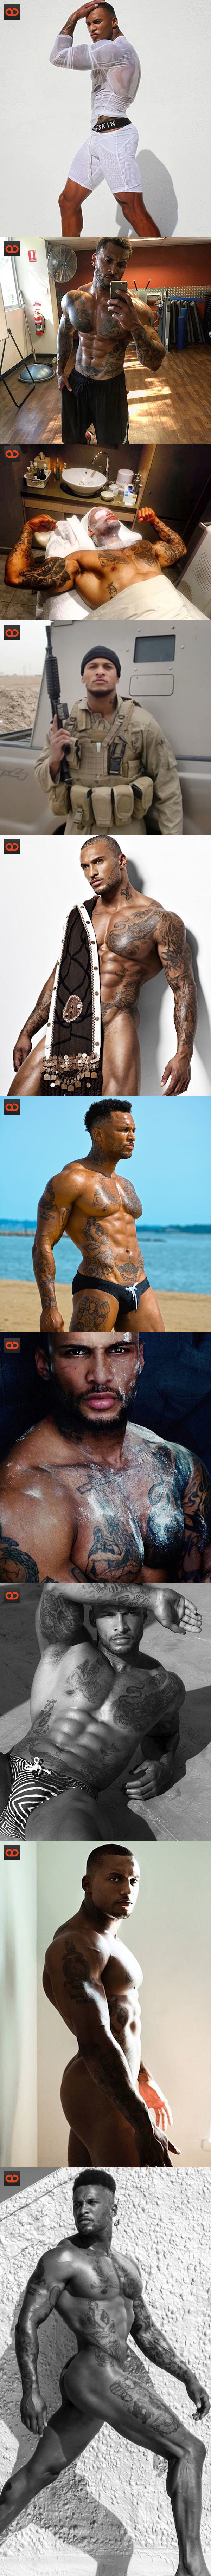 David Mcintosh, From Celebrity Big Brother UK, Flaunts His Massive Endowment In Alleged Cam Video!